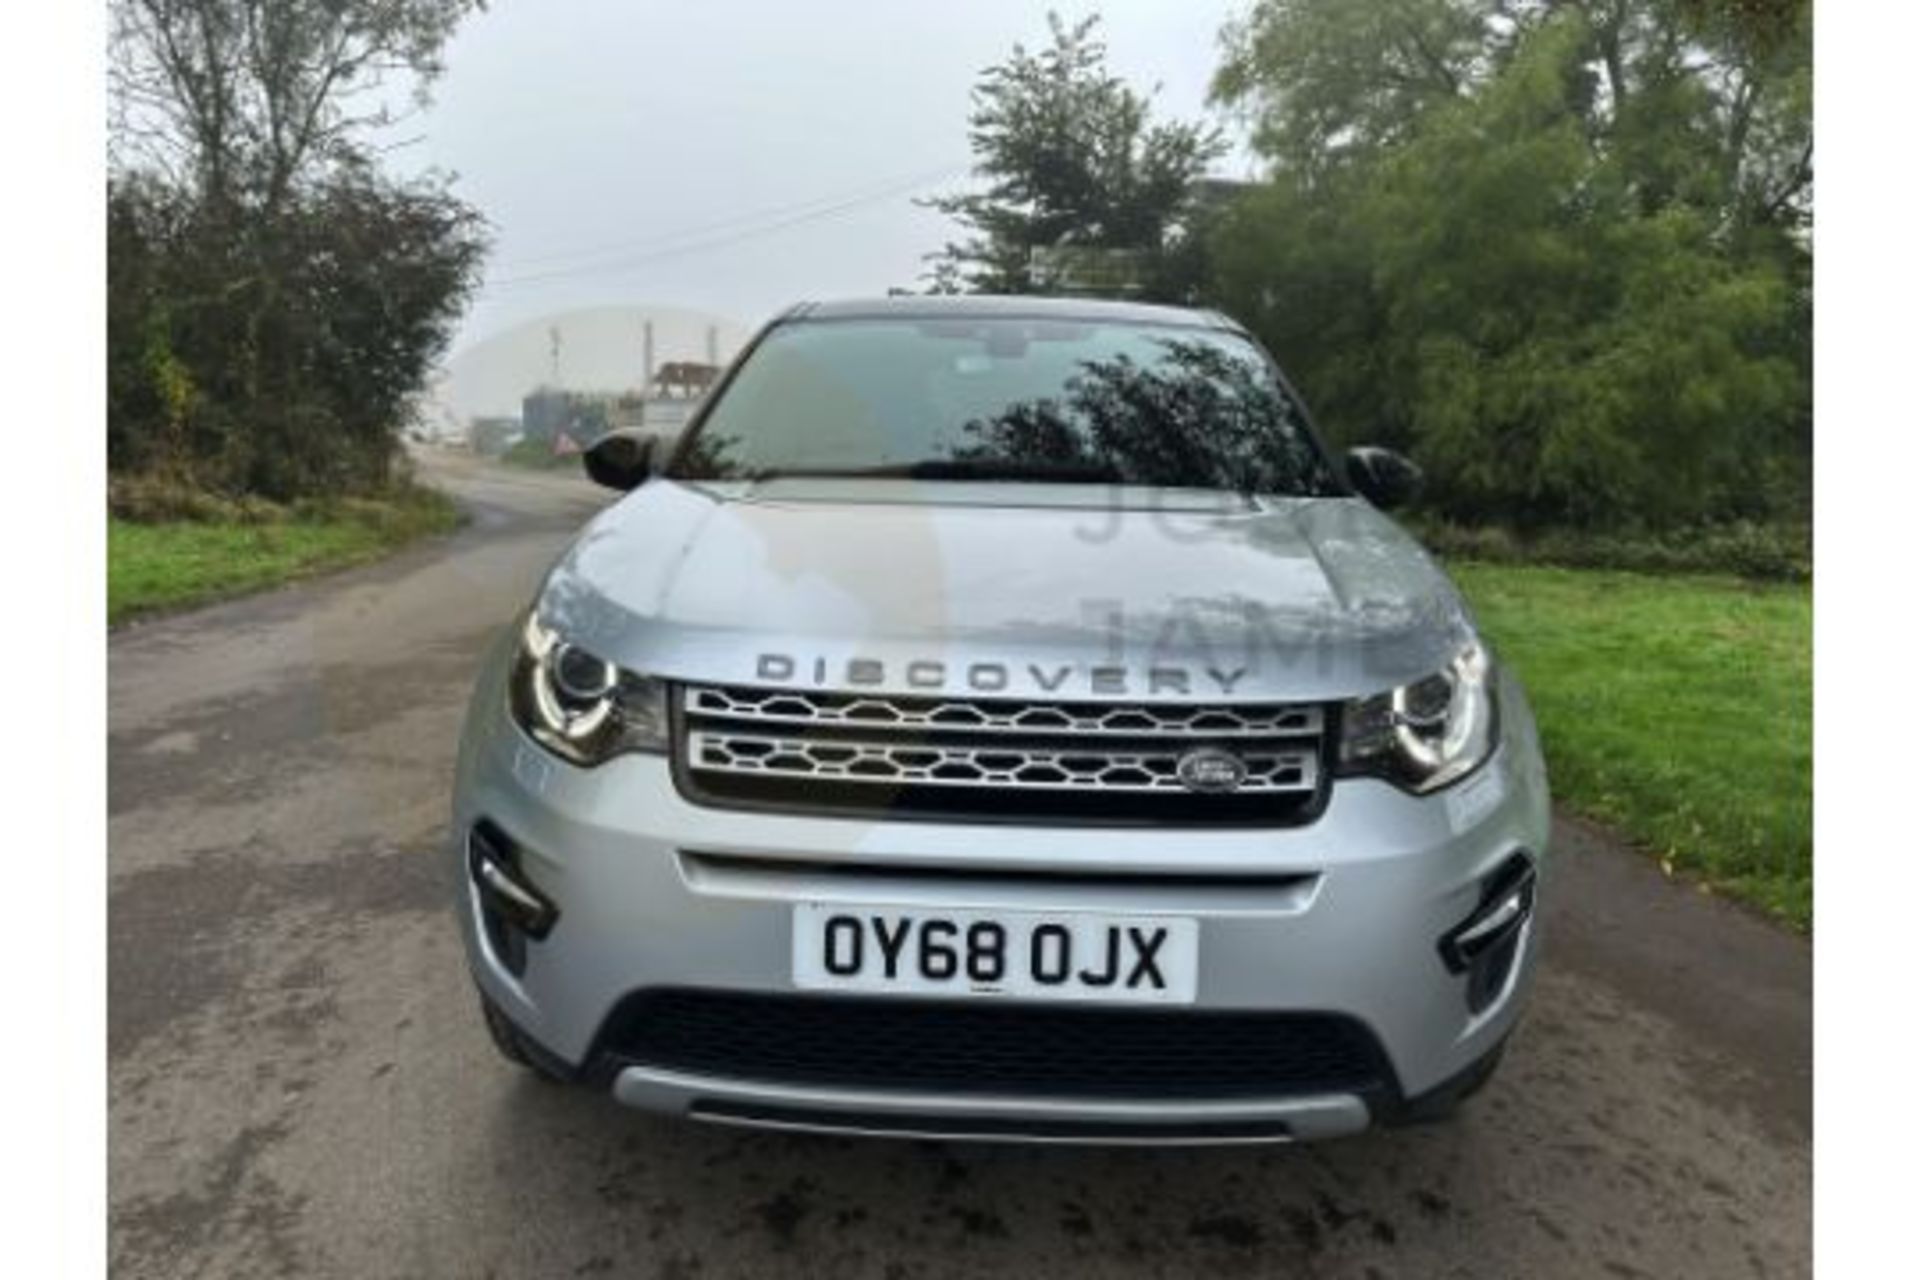 (ON SALE) LANDROVER DISCOVERY SPORT "HSE" EDITION 2.0 TD4 (180) AUTOMATIC - 68 REG - PAN ROOF - Image 4 of 51